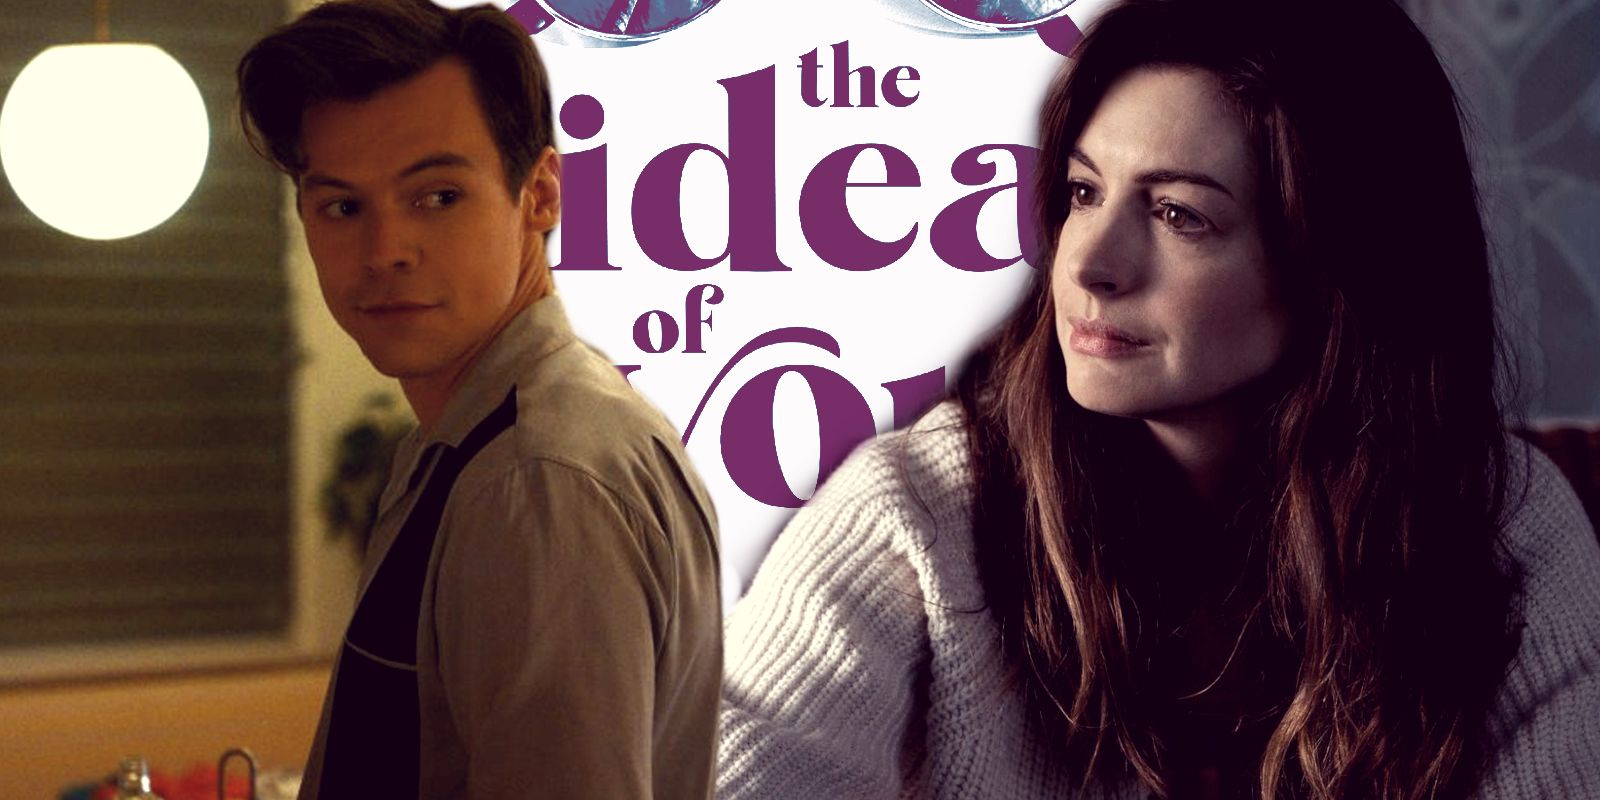 The Idea Of You is rumored to be based on Harry Styles fanfiction